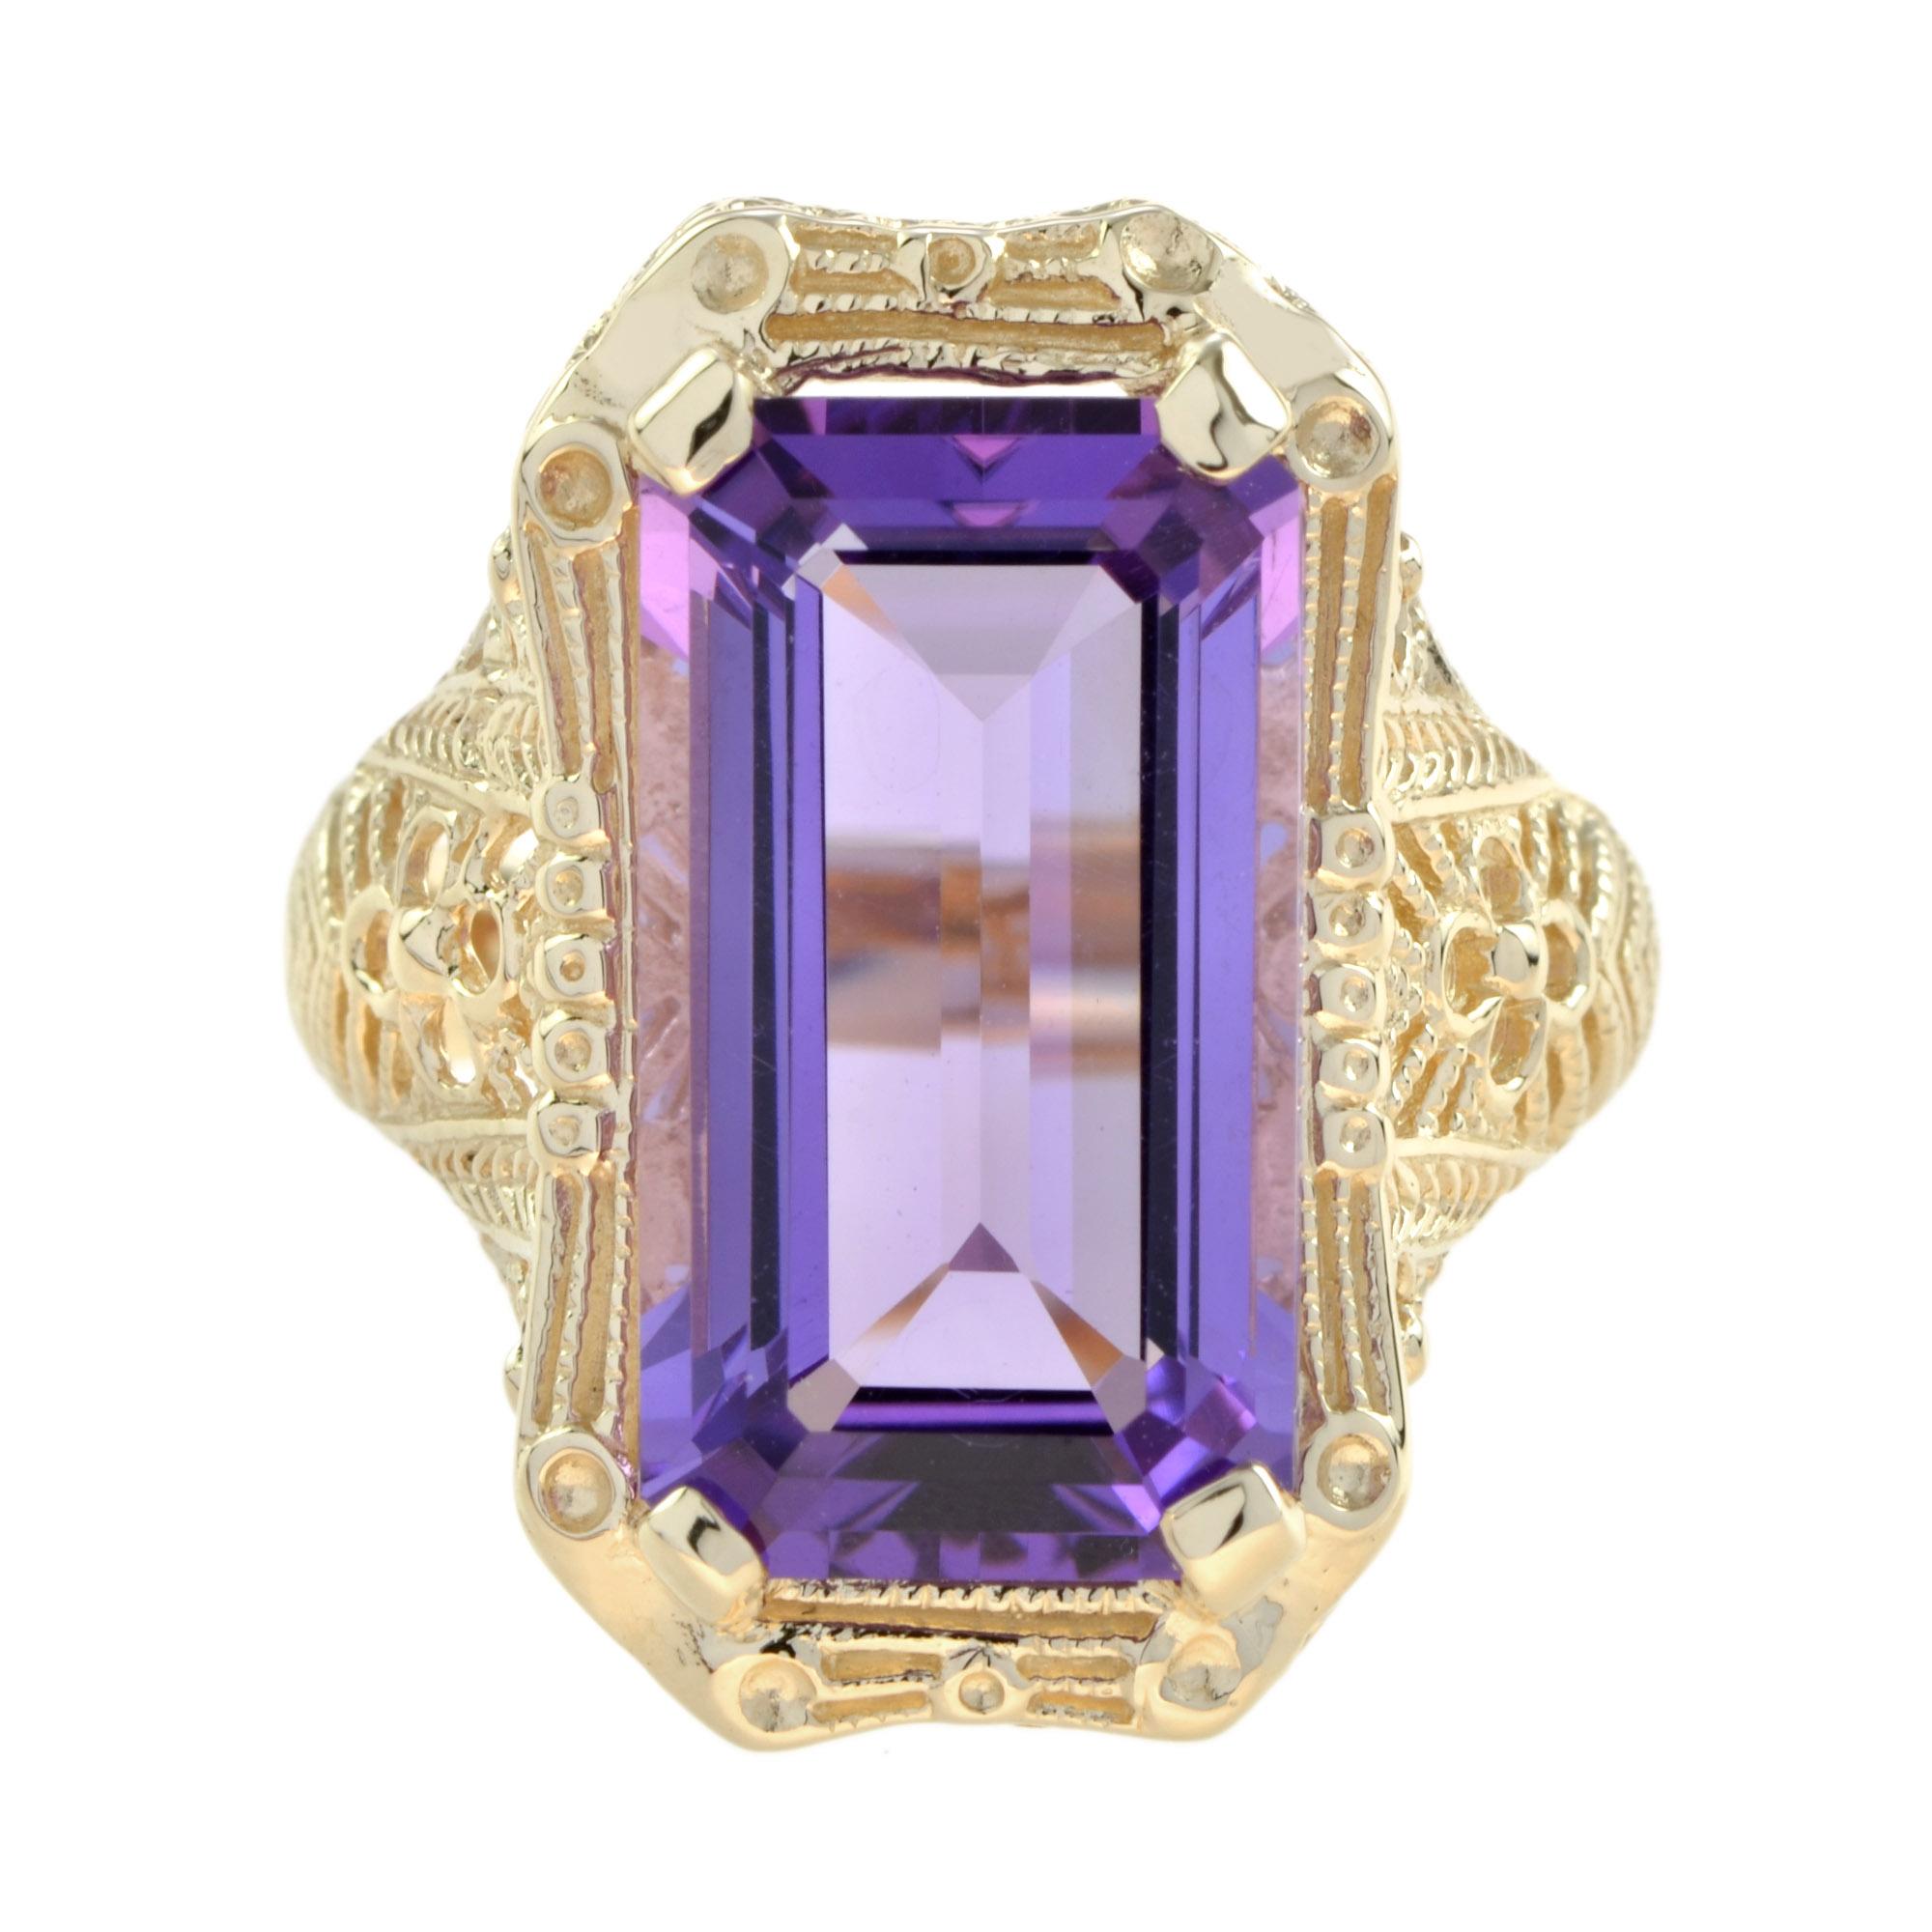 A sensational vintage look with a 9.00 carat amethyst the practically sings out loud in this filigree ring setting. Flowers and leaves adorn a weave of yellow gold in this lacy and airy setting. 

Ring Information
Style: Art Deco Filigree
Metal: 9K